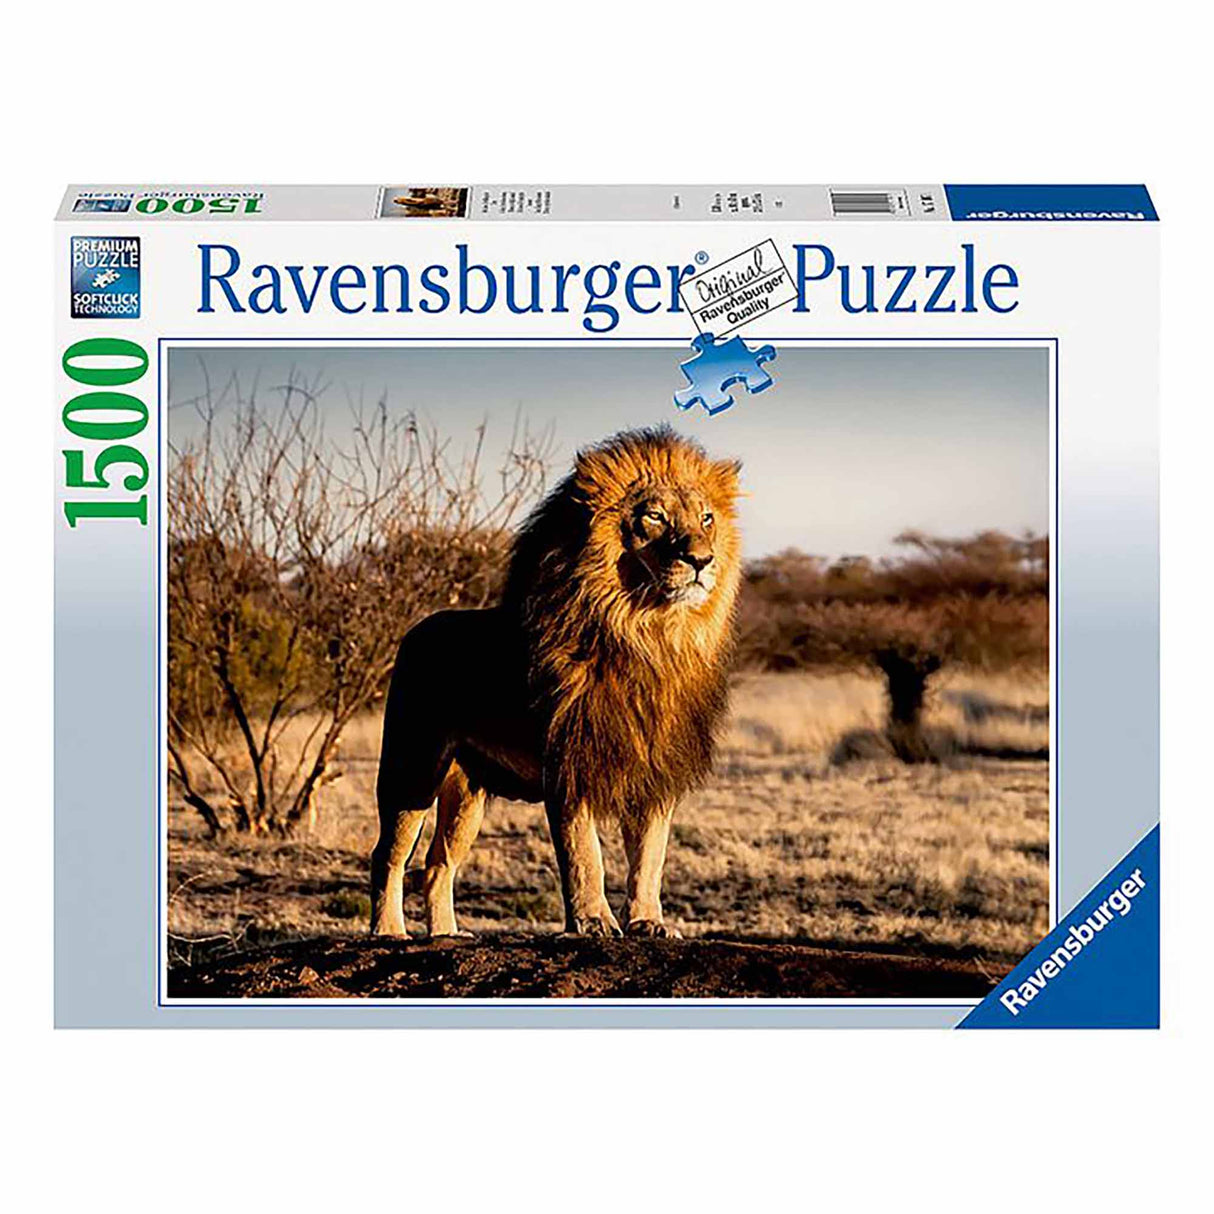 Ravensburger Lion, King of the Animals Puzzle (1500 pieces)